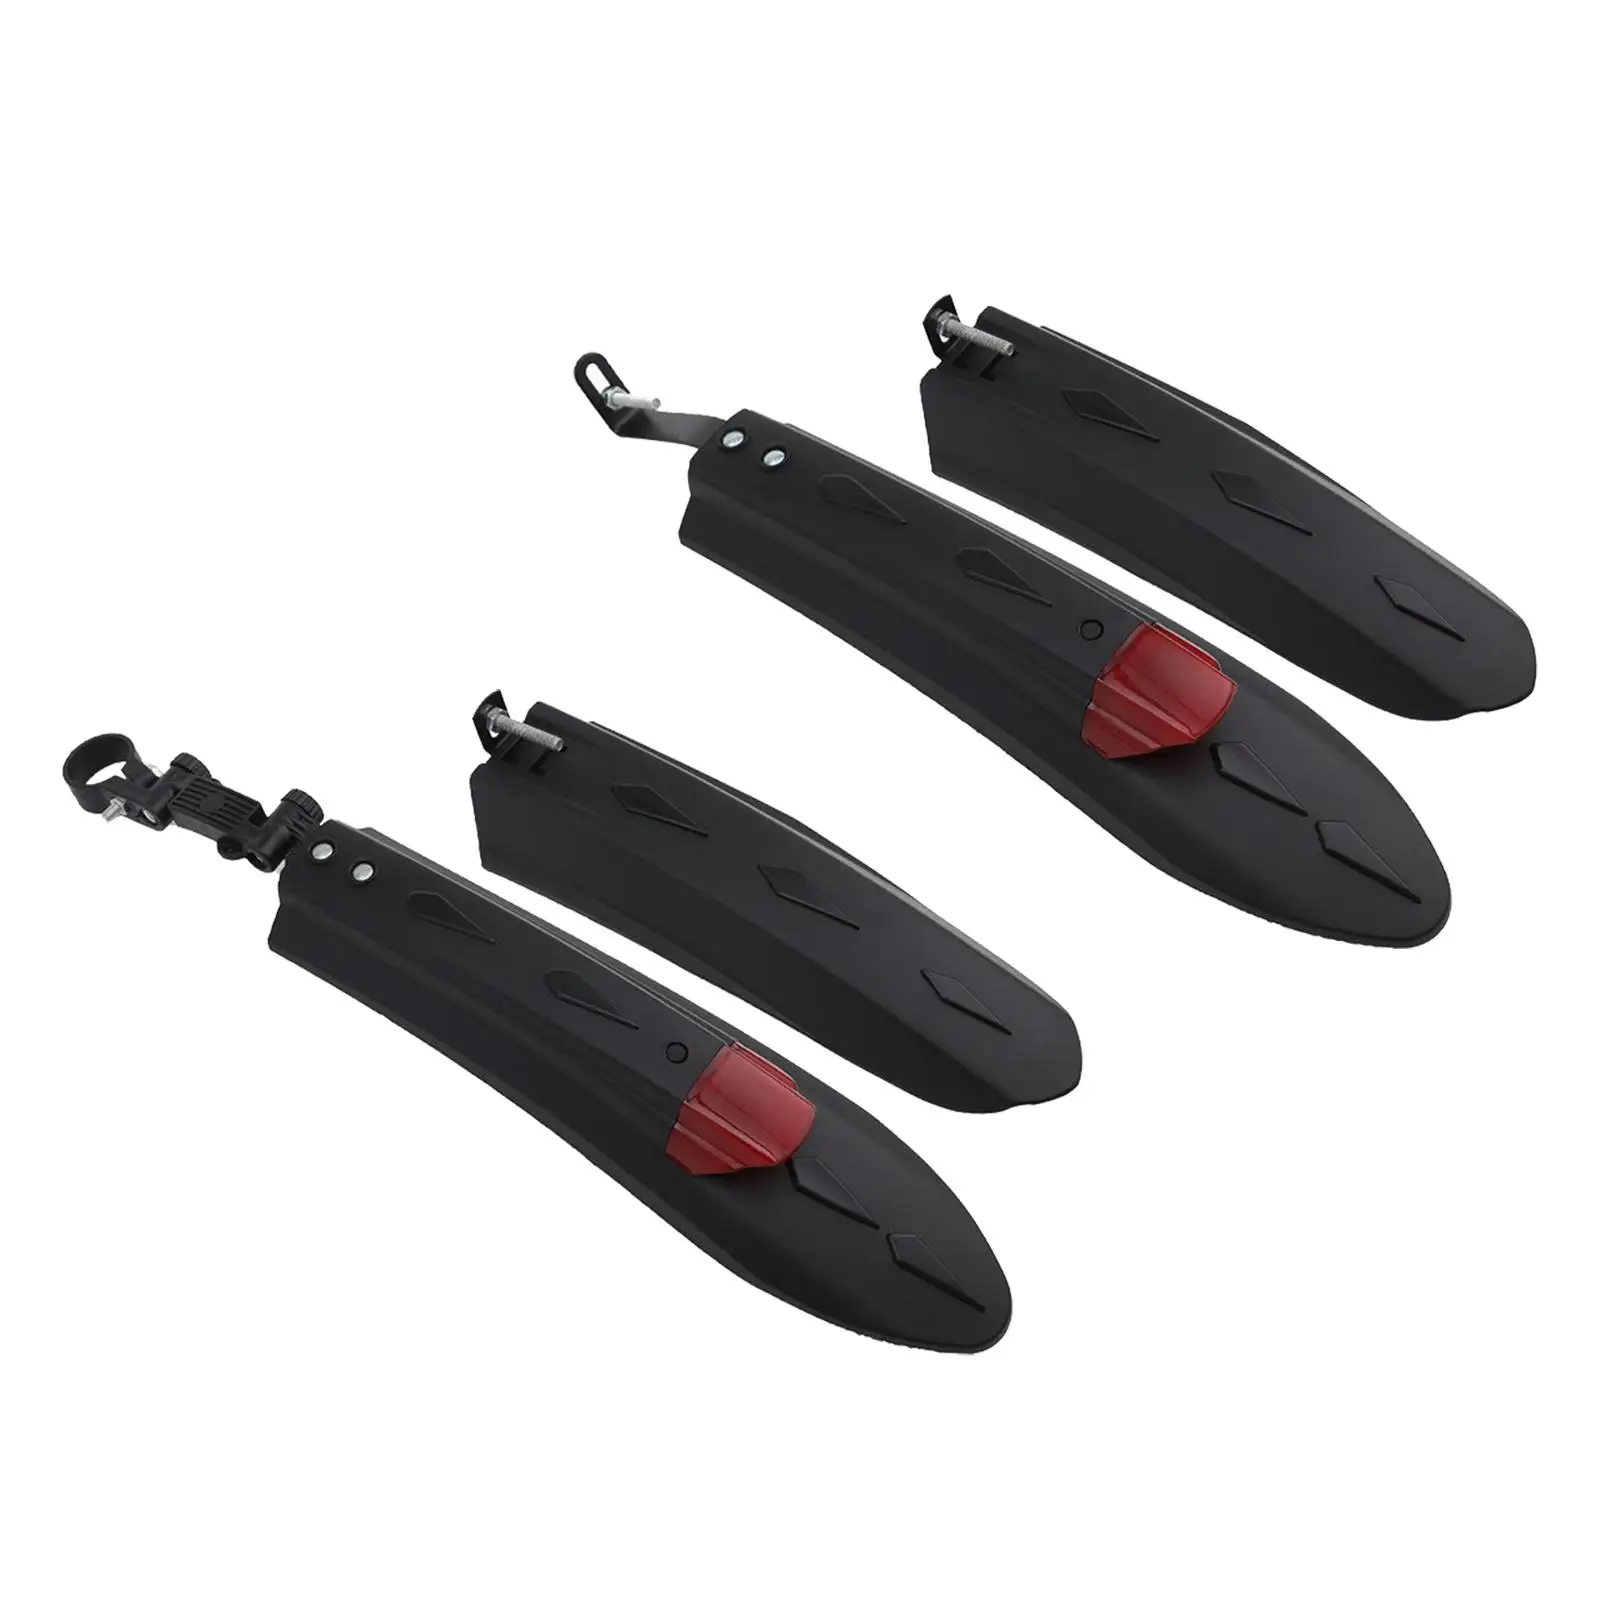 Bike Mudguard Front Rear Set Glow Wheel Protector Portable Bike Front & Rear Fenders for Riding Outdoor Sports Cycling Equipment